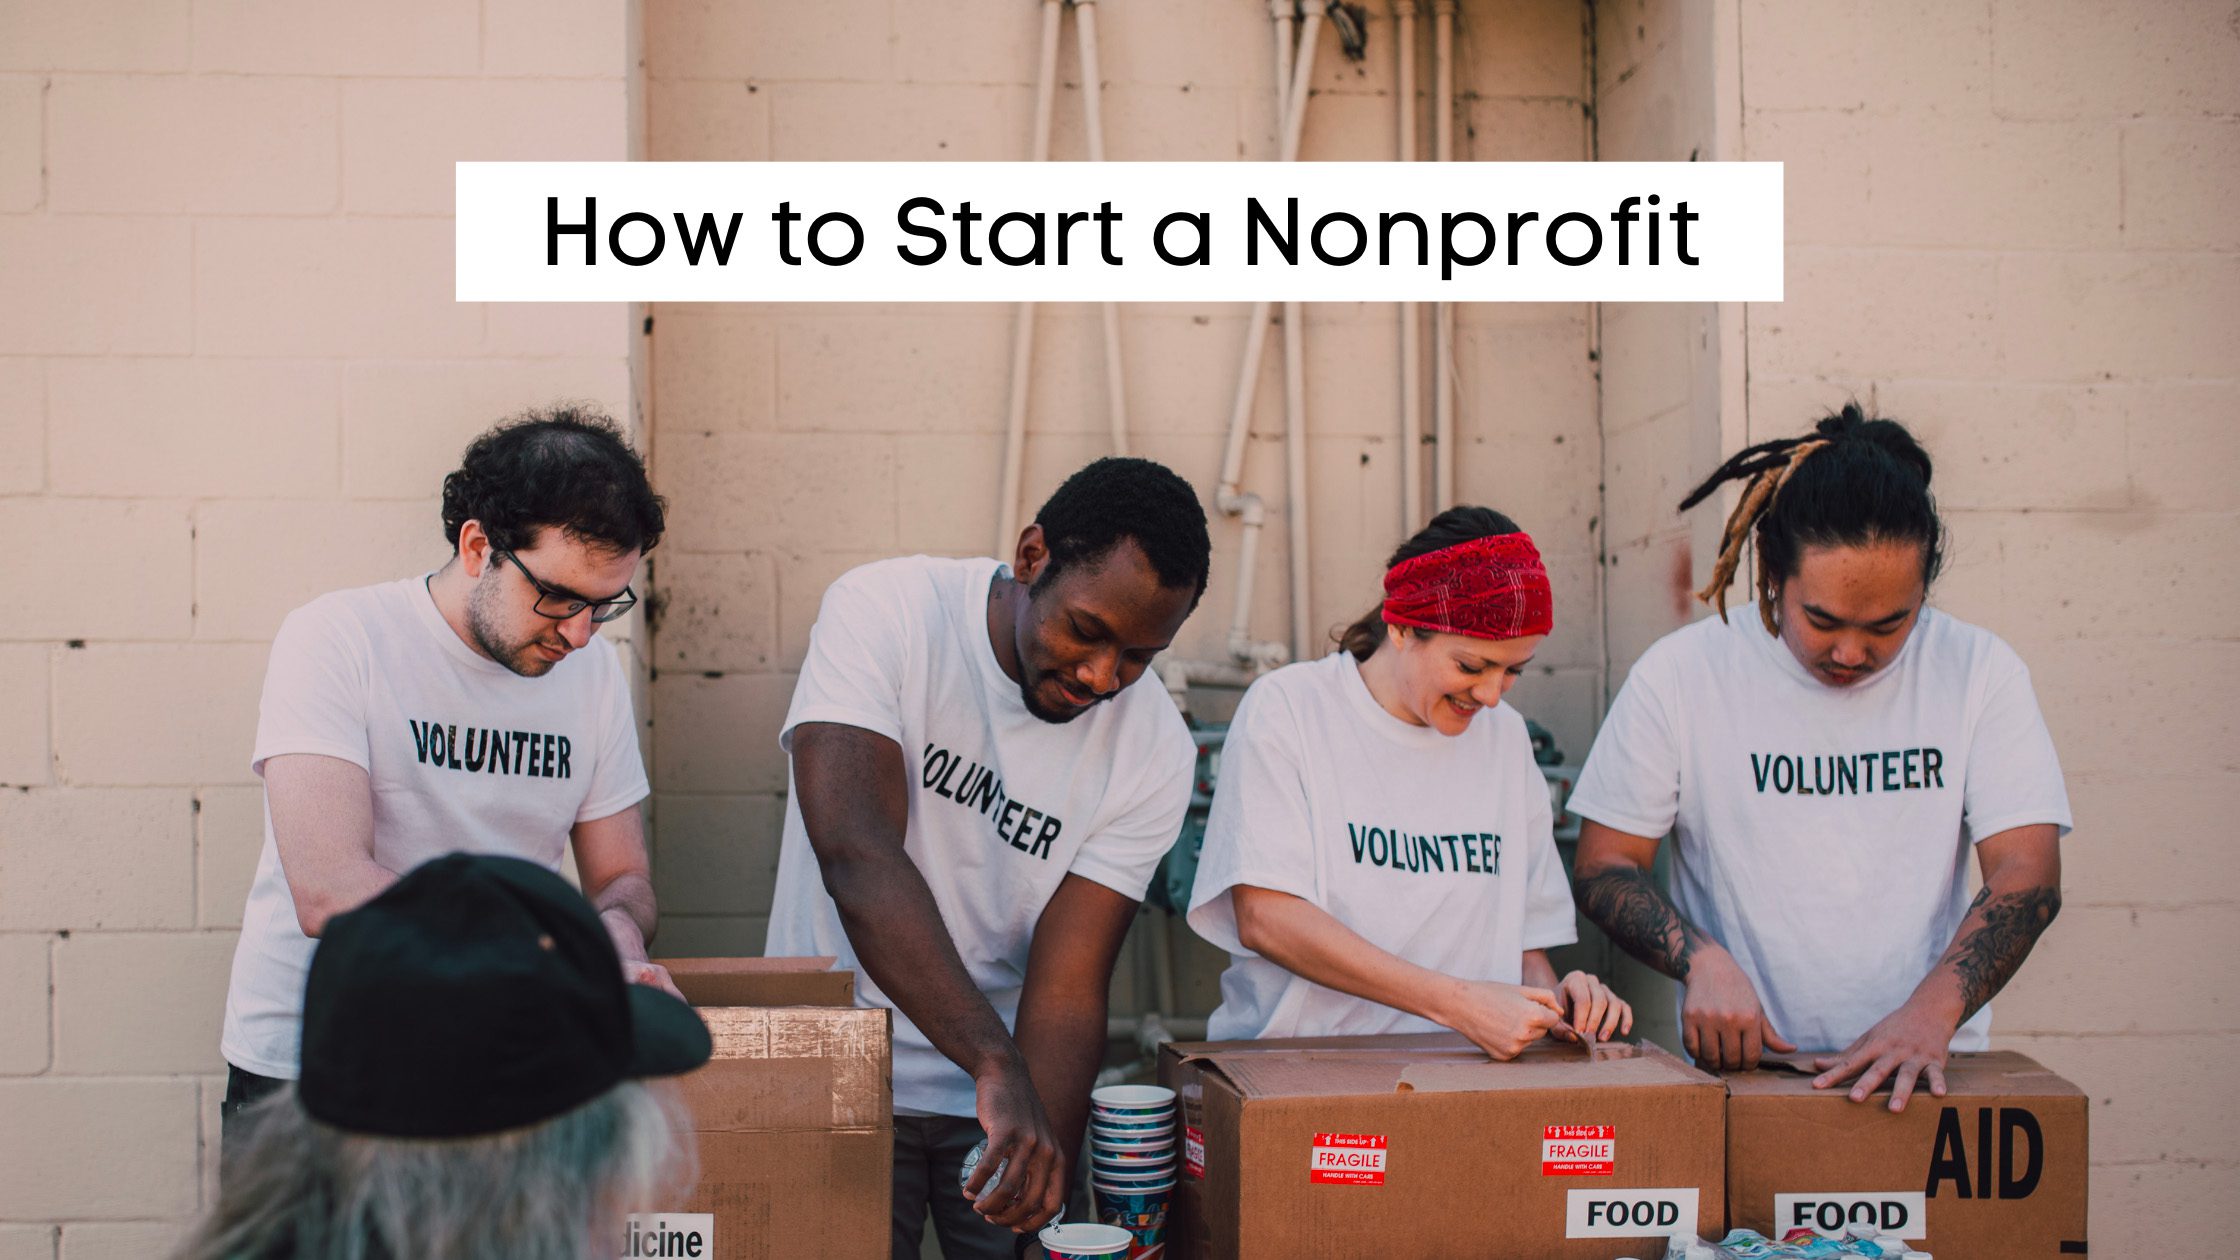 how to start a nonprofit